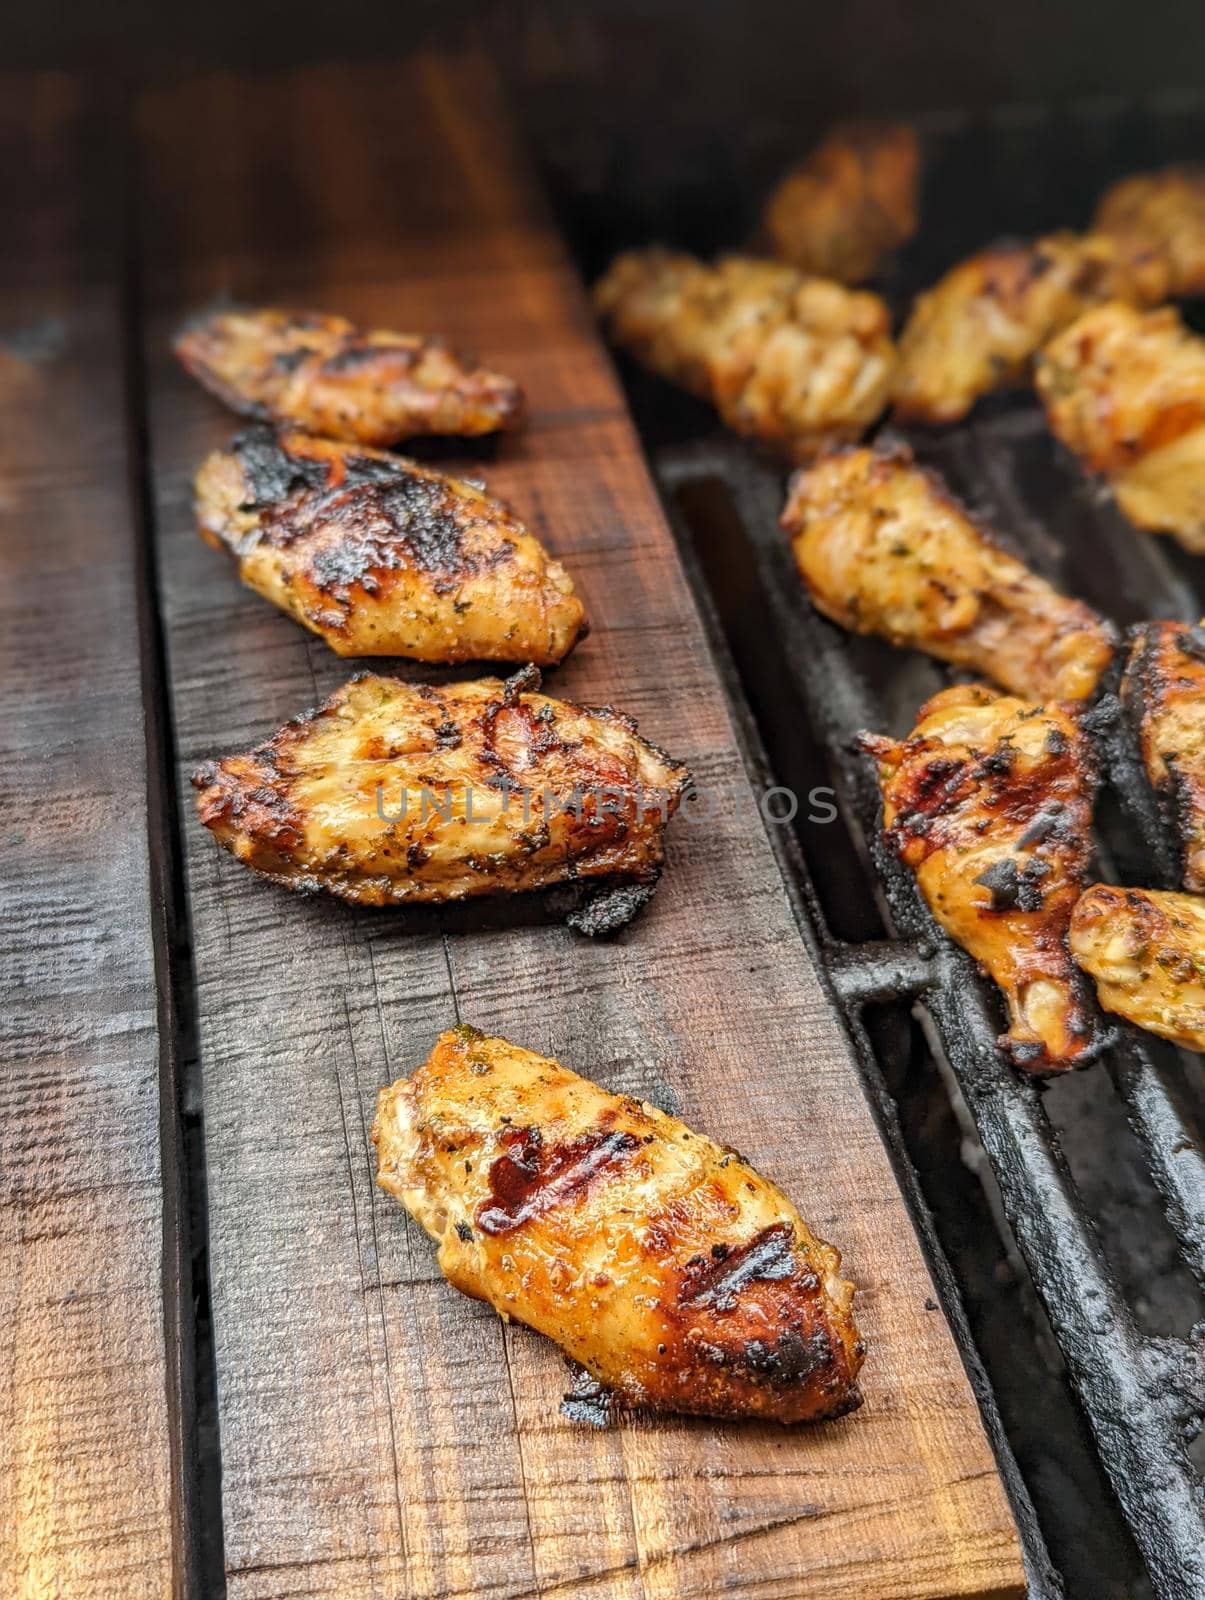 Chicken meat fried on a barbecue grill by digidreamgrafix